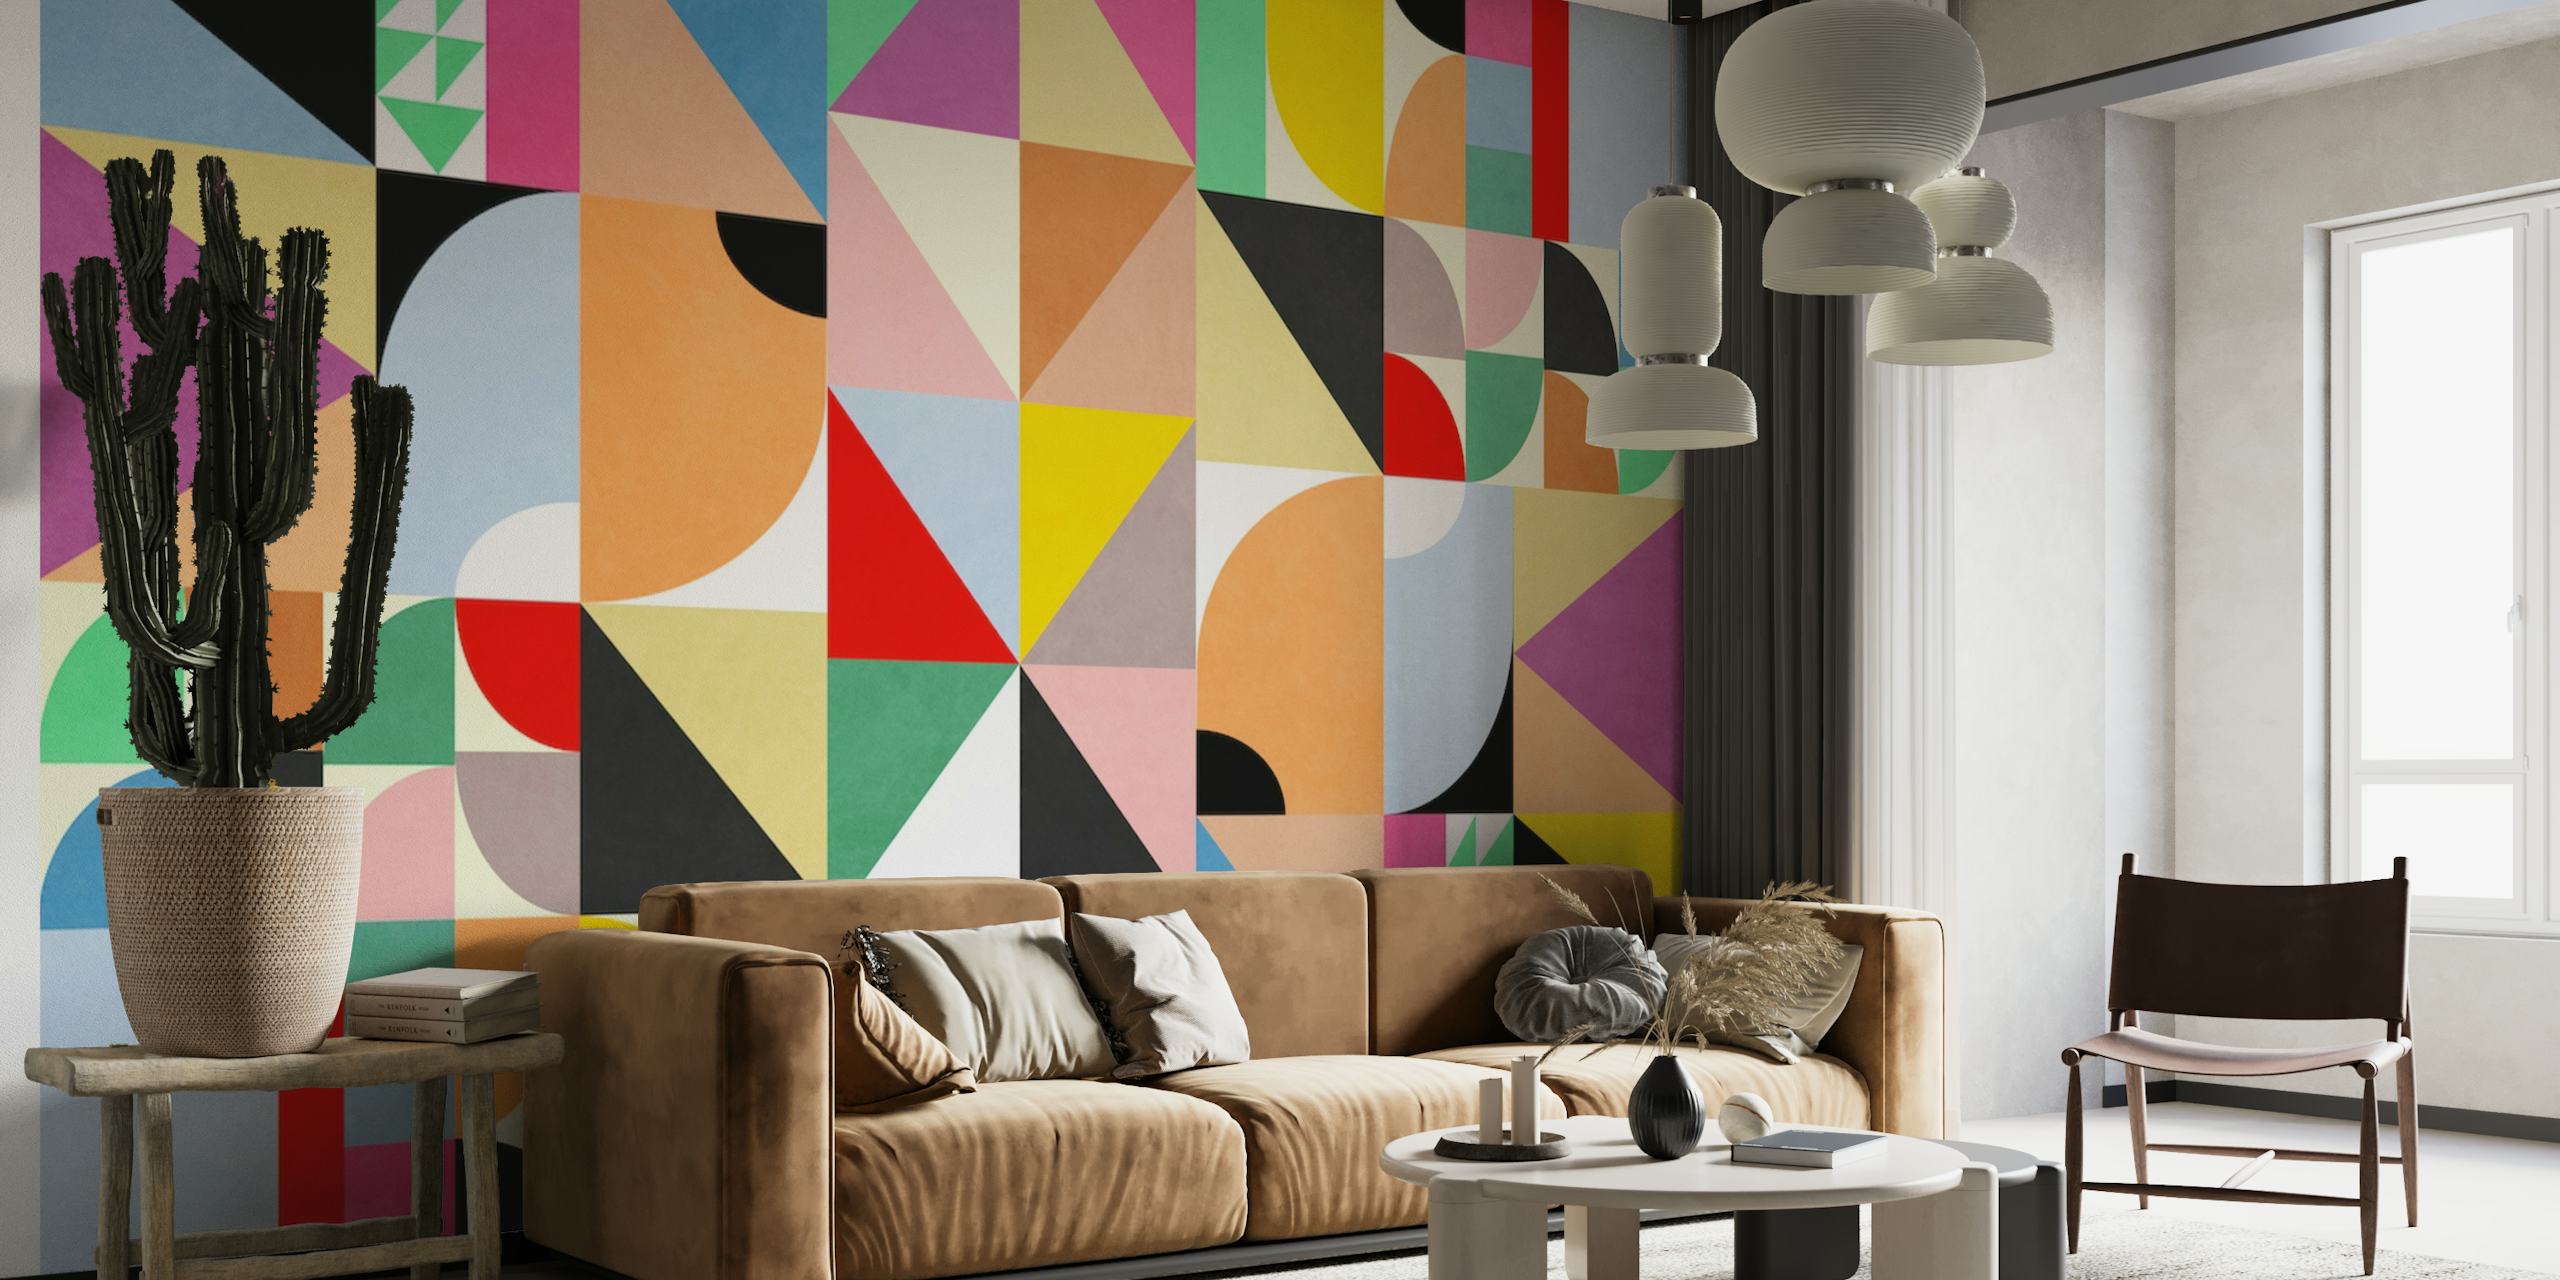 Colorful abstract geometric shapes mural with a mix of triangles, circles, and patterns